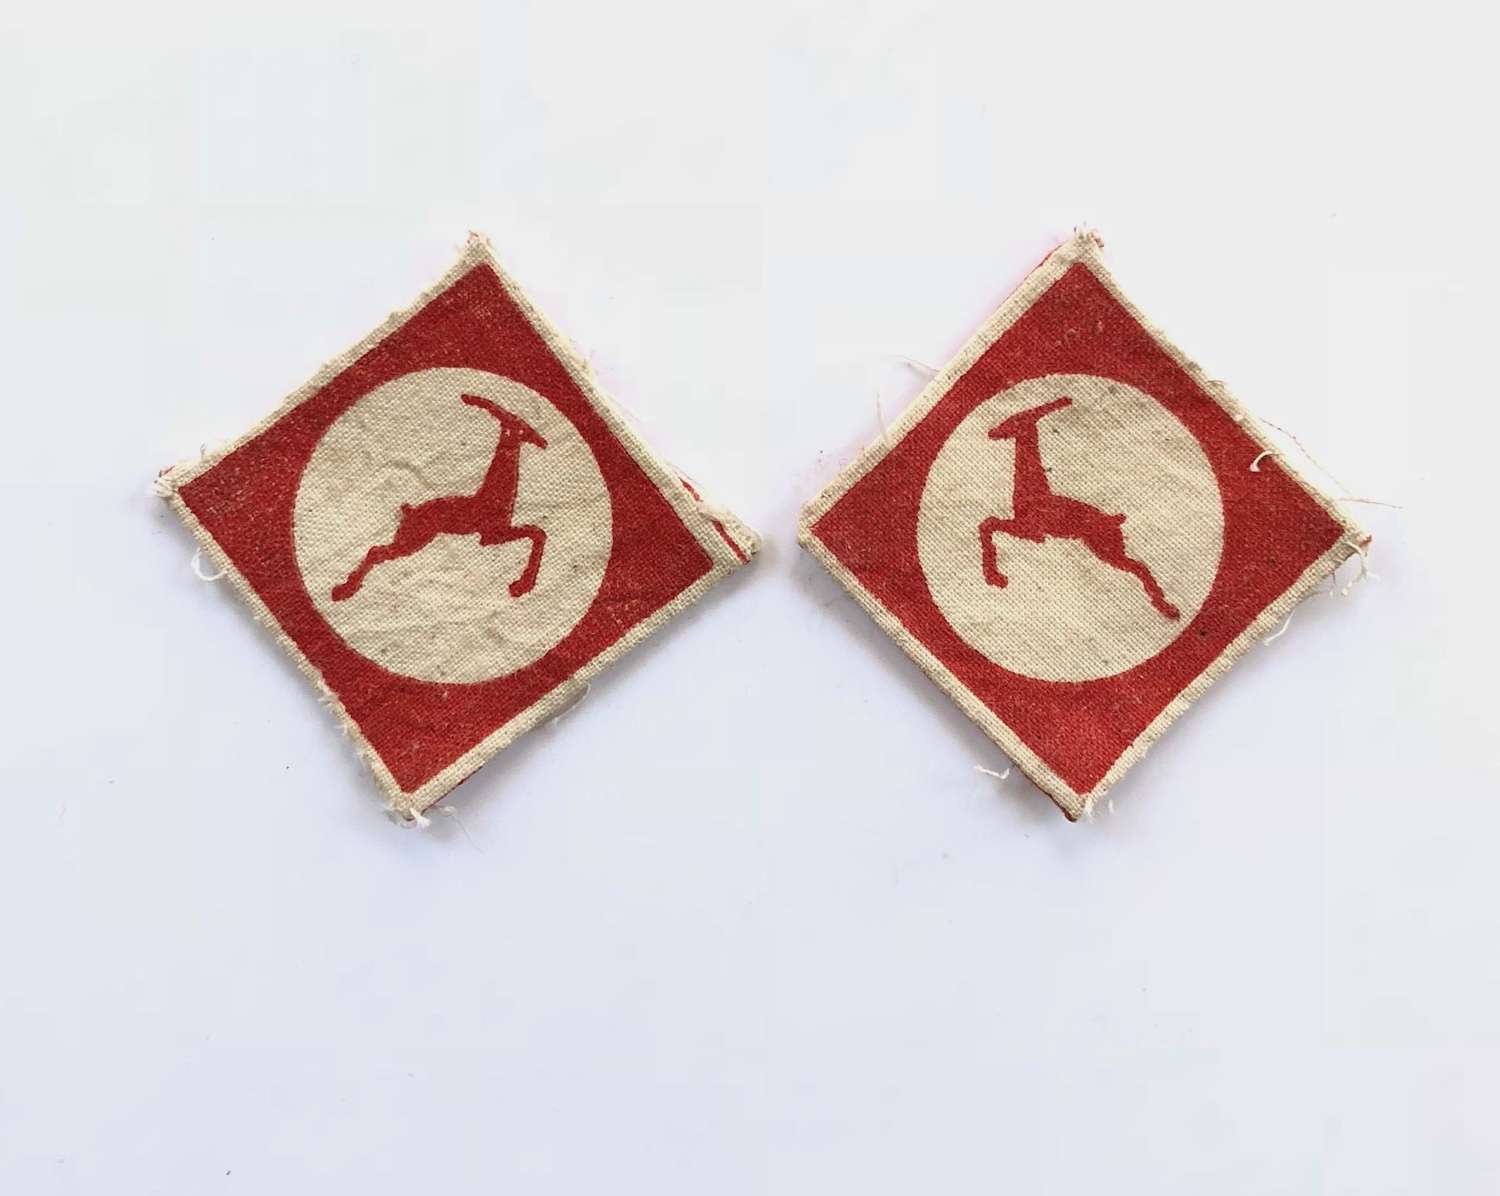 British 13 Corps Pair of Formation Badges.